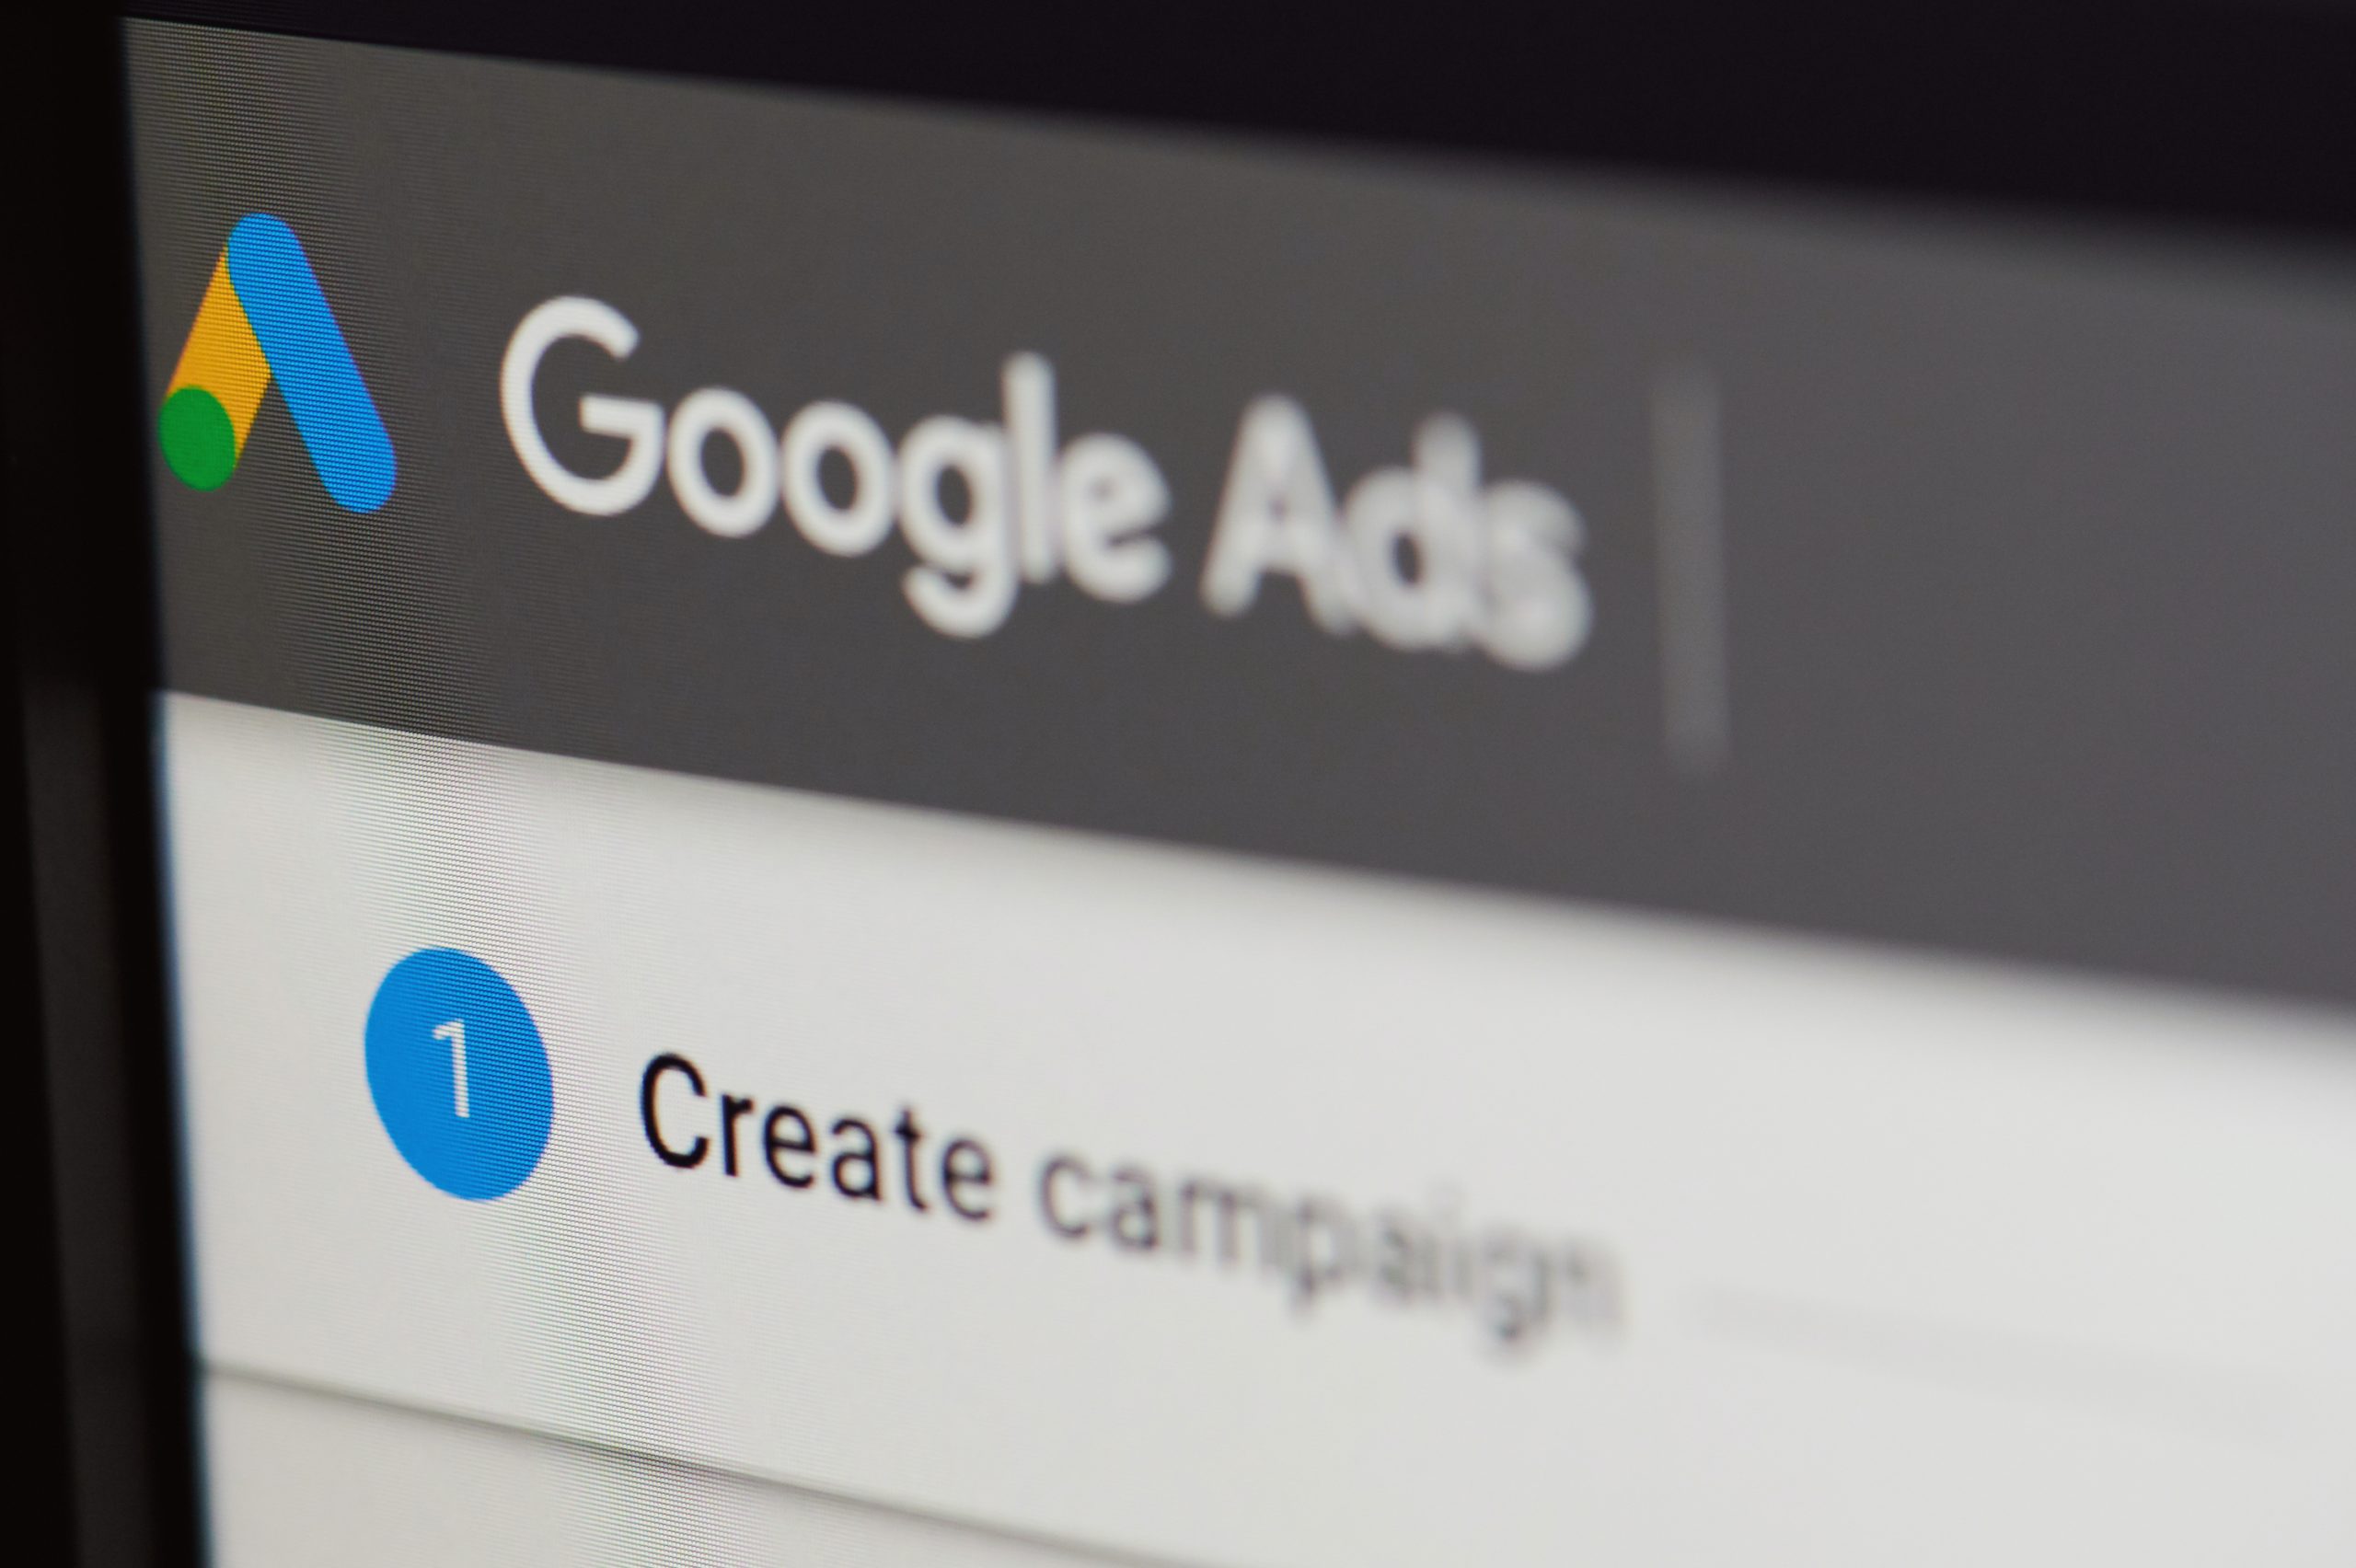 Google Ads Conversion Updates: Global Site Tag to Set First-Party Cookie; GMP to Model Conversions in Europe